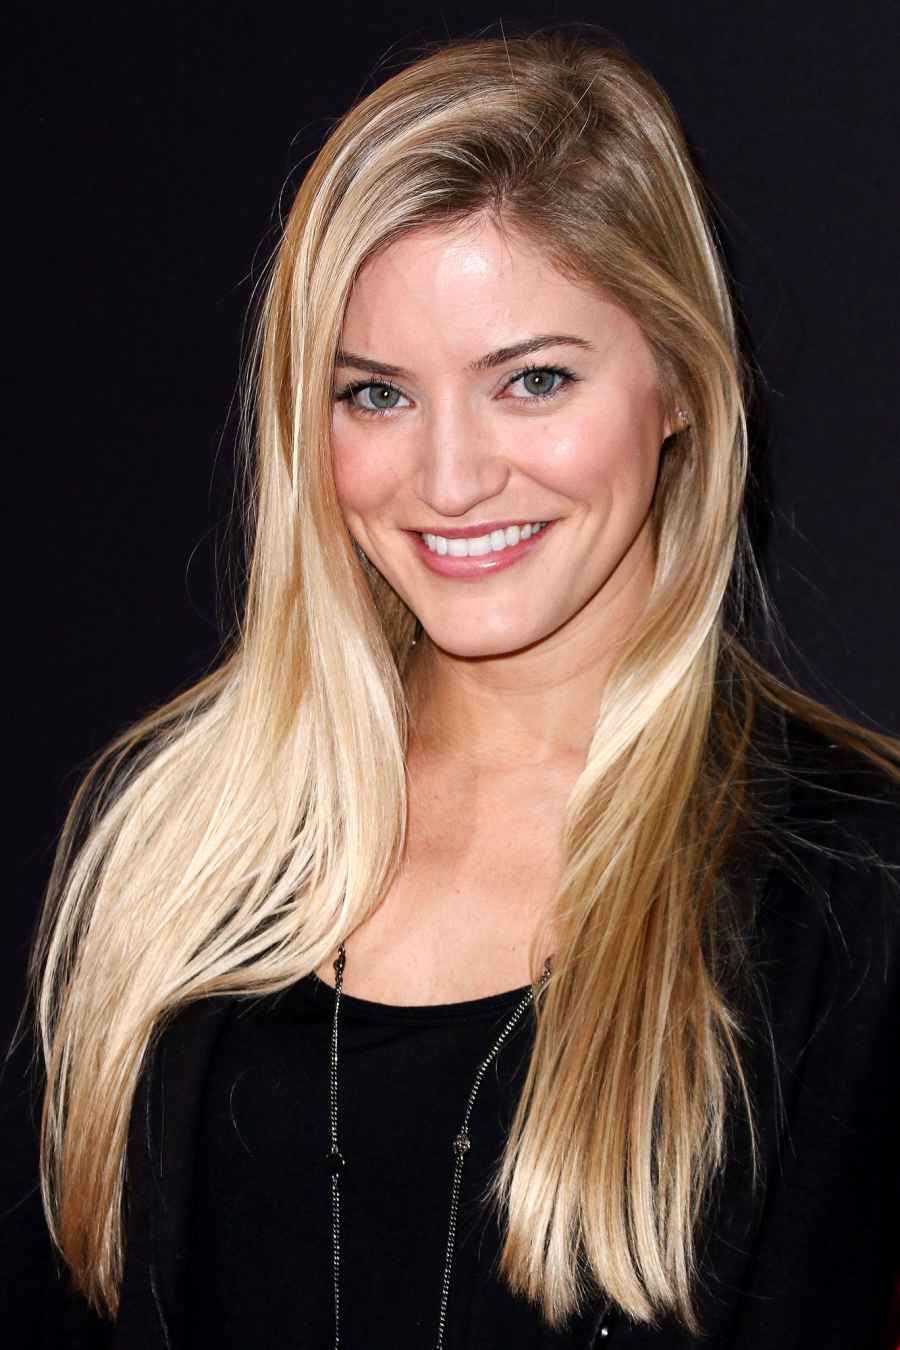 Roles iJustine 5 Things to Know About the YouTube Star Justine Ezarik